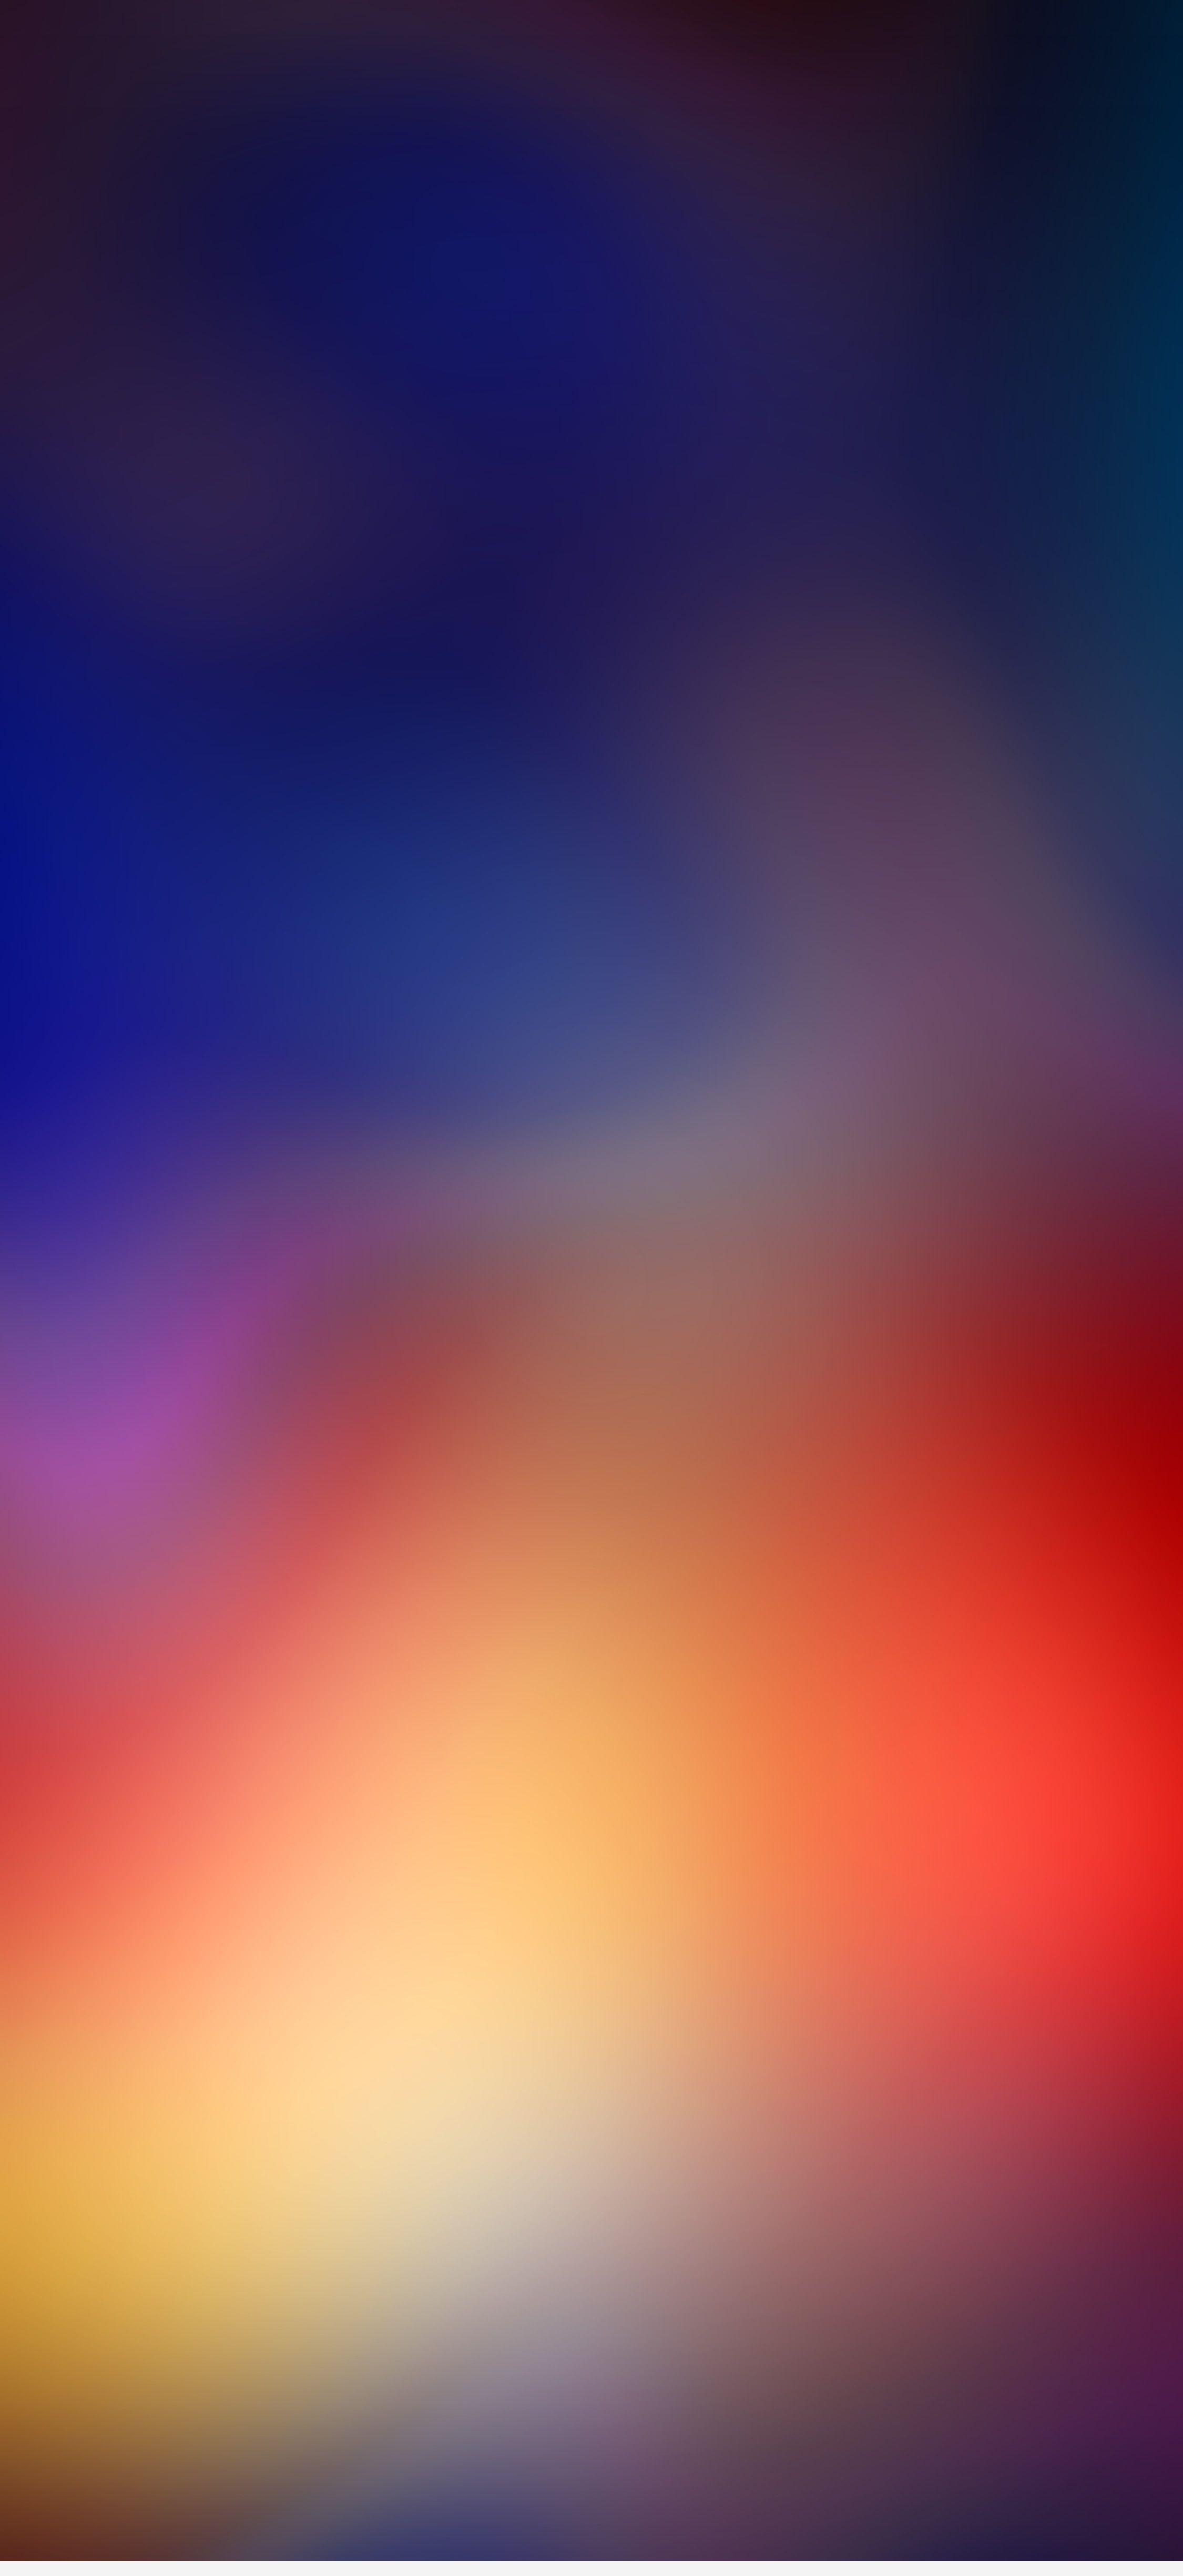 iphone x wallpapers 4k hd